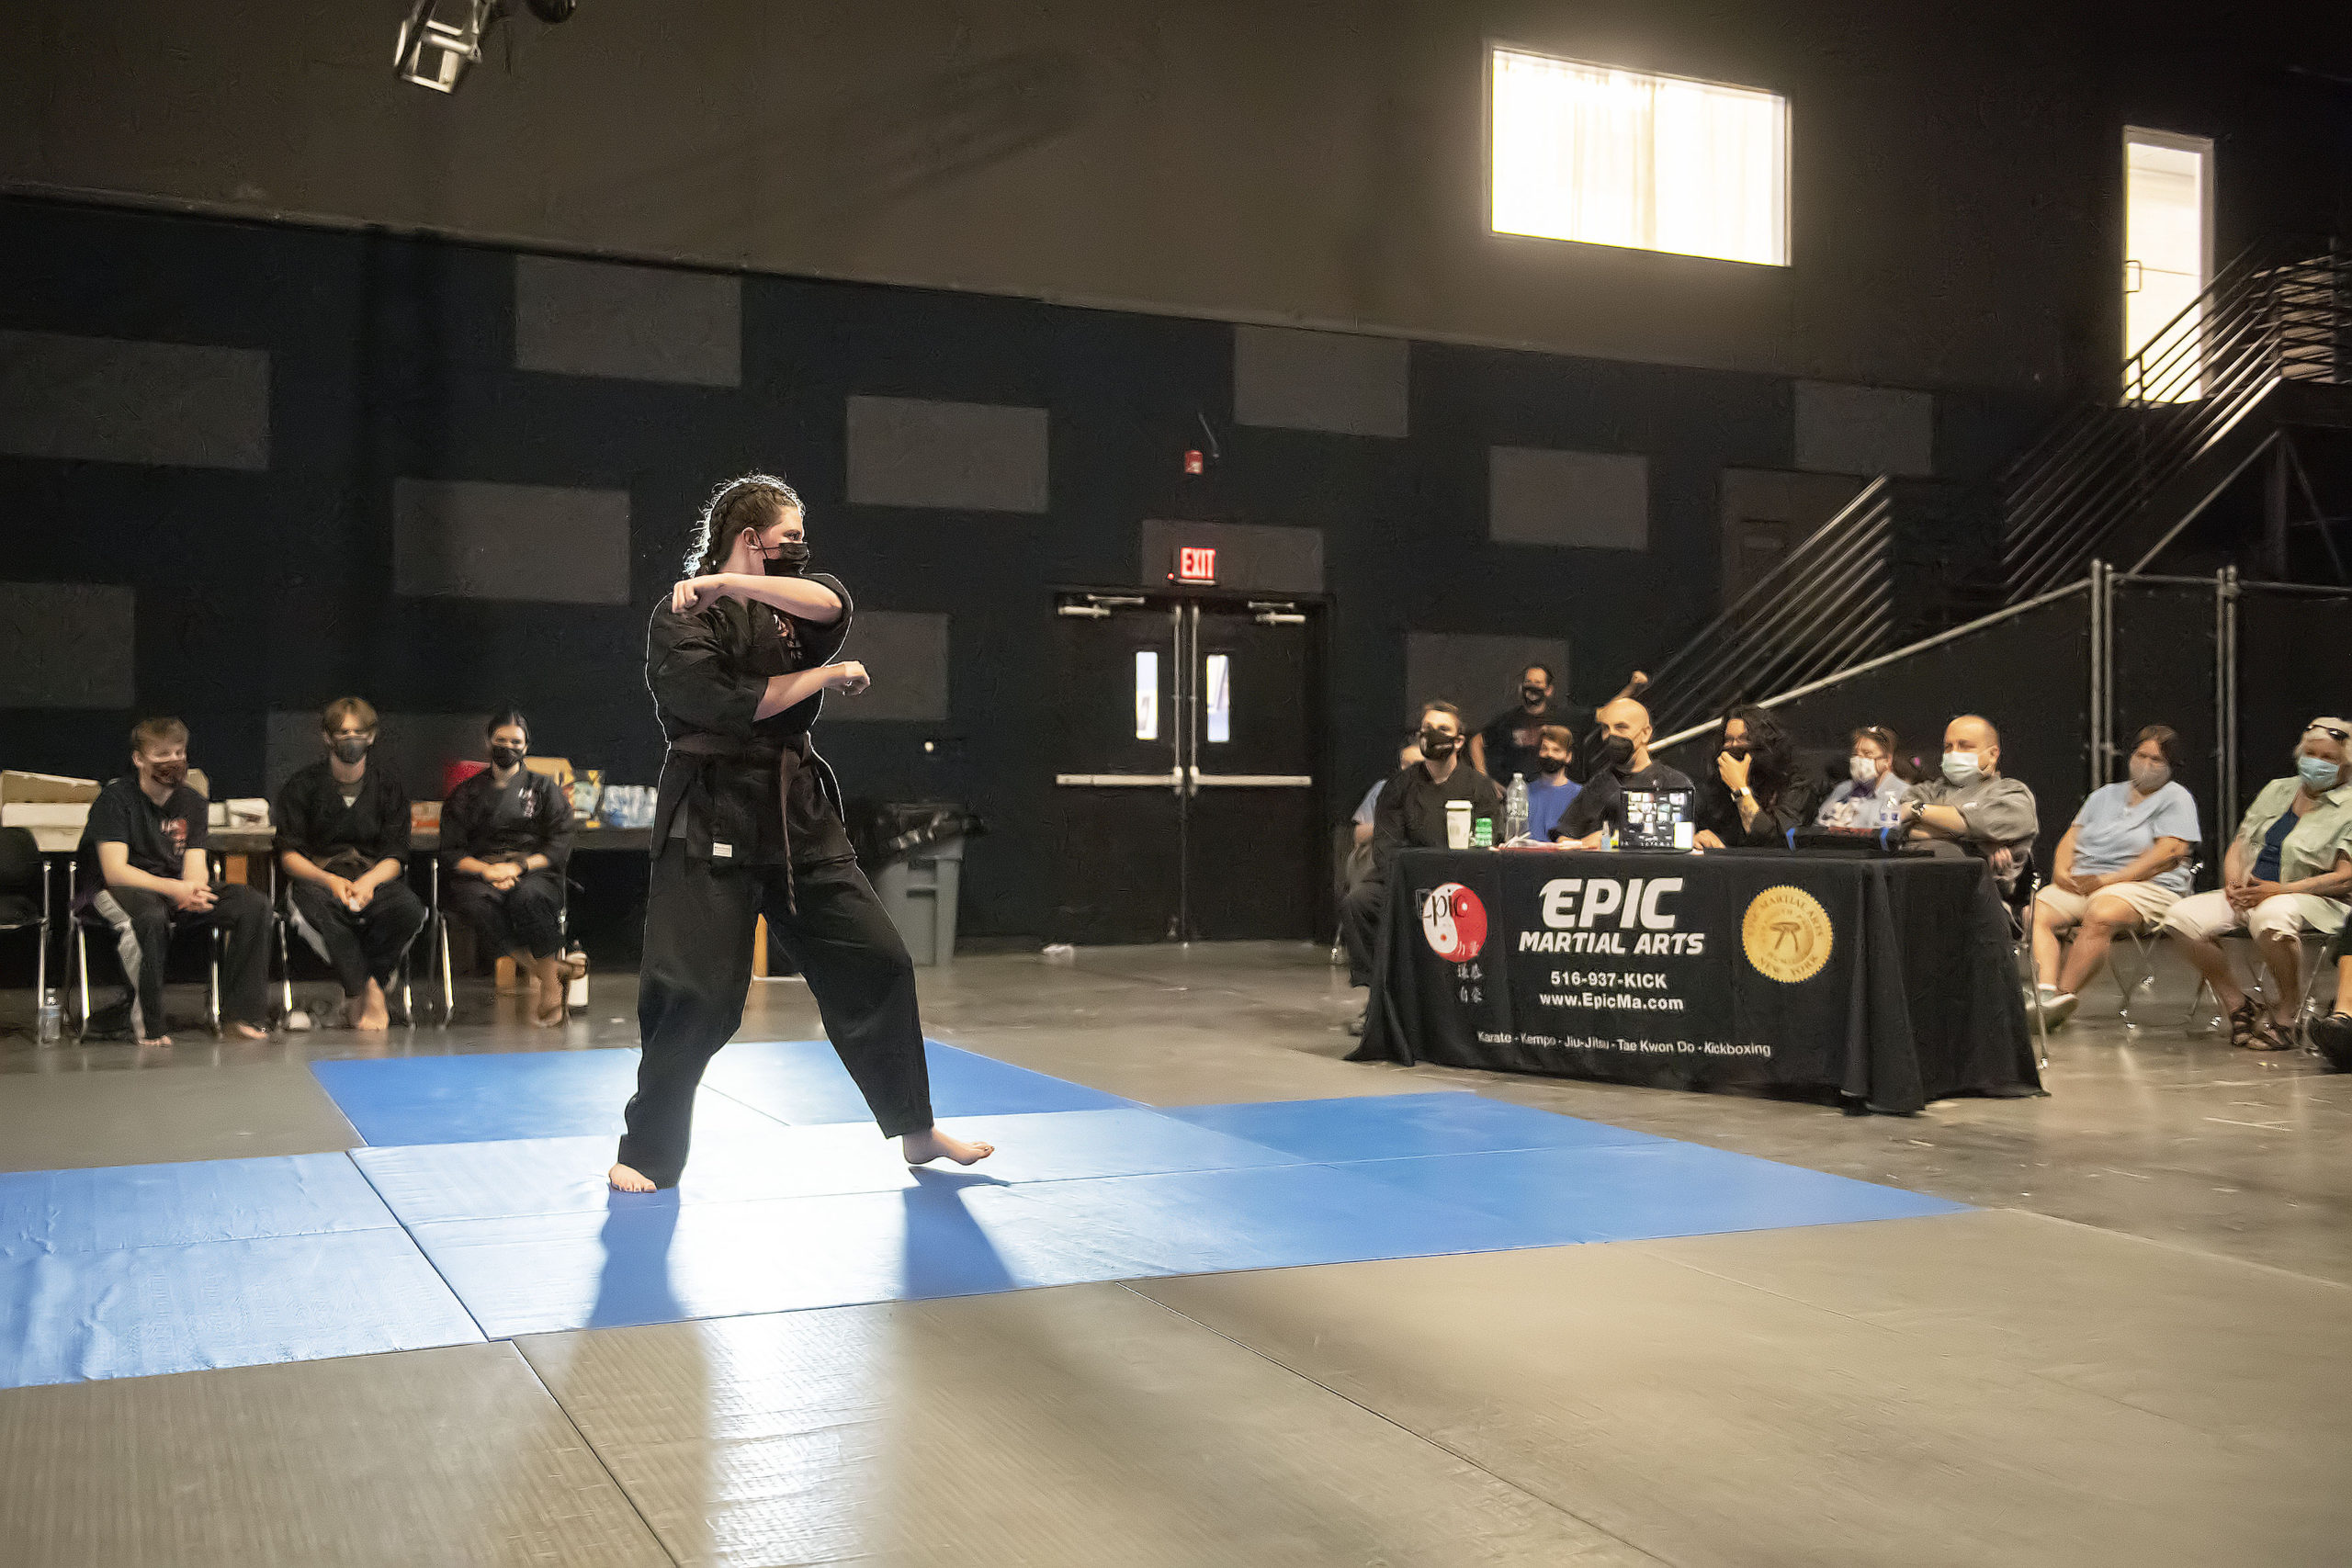 EPIC Martial Arts brown belt student Emily Glass performs a series of skills before a panel of six black belts in order to receive her own promotion to black belt during a ceremony at LTV studios in Wainscott on Sunday.